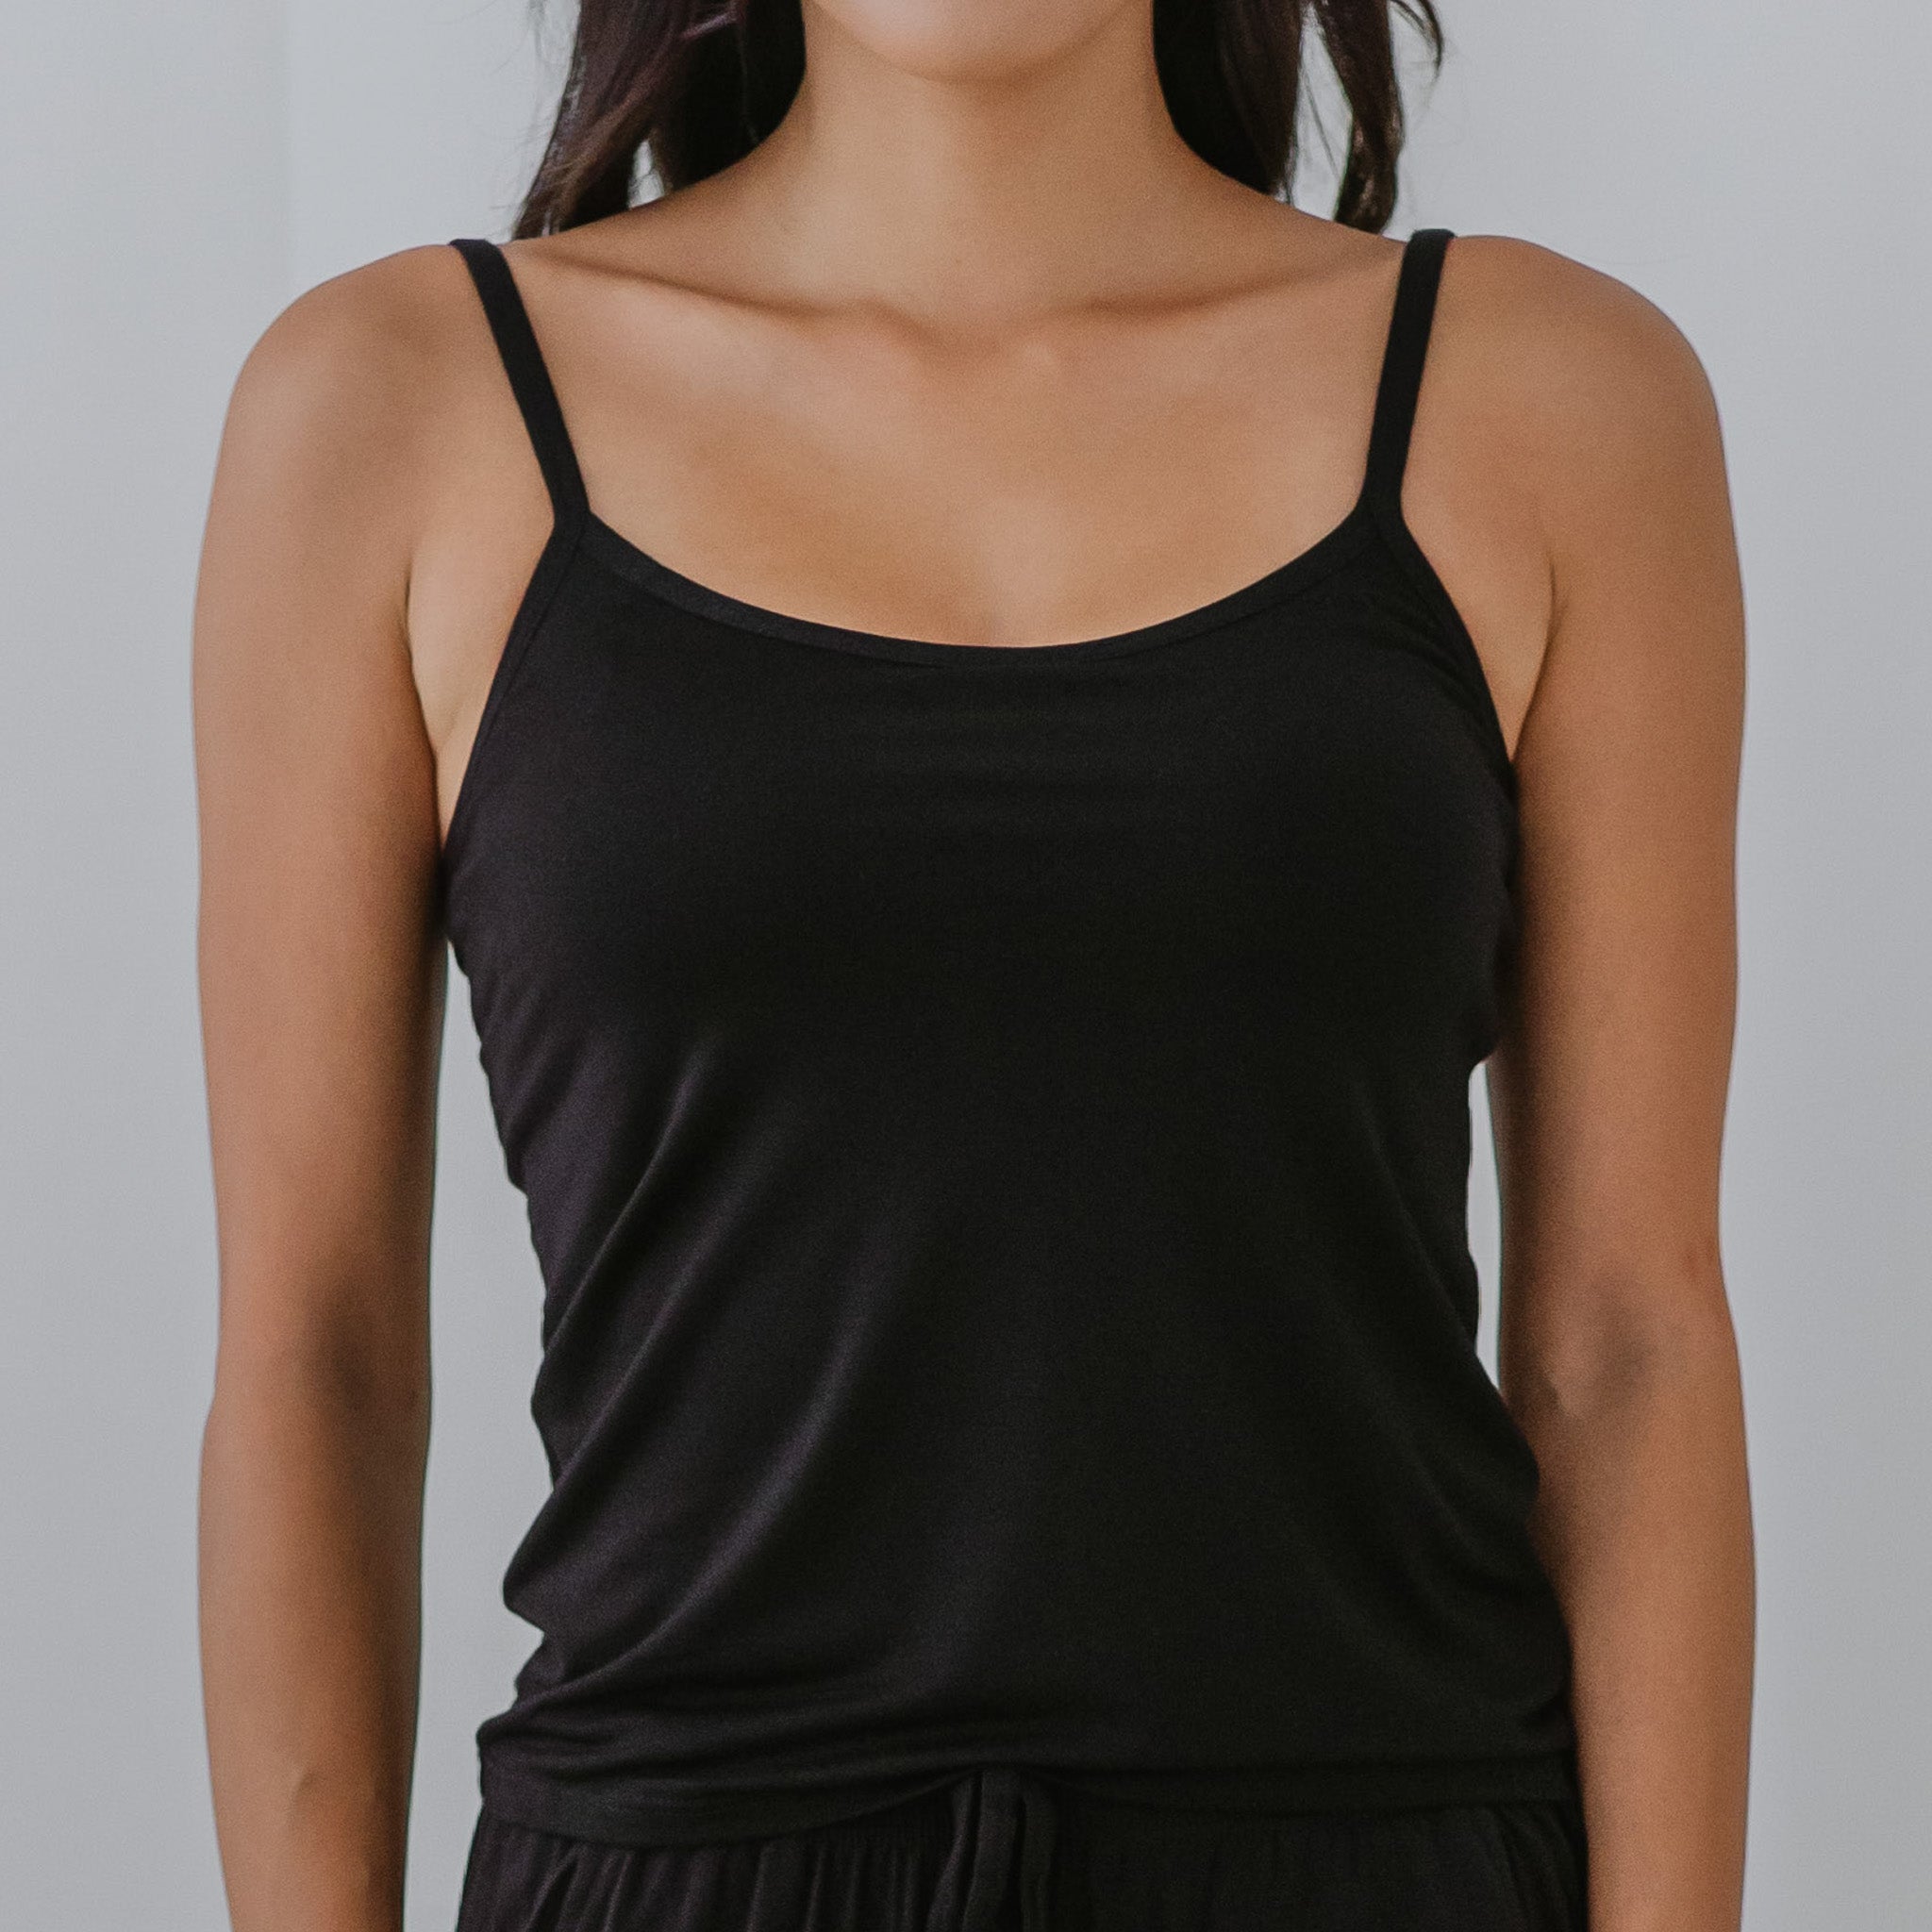 Everyday Bra-less Modal® Fabric Camisole Bra Top in Black (With In-Bui